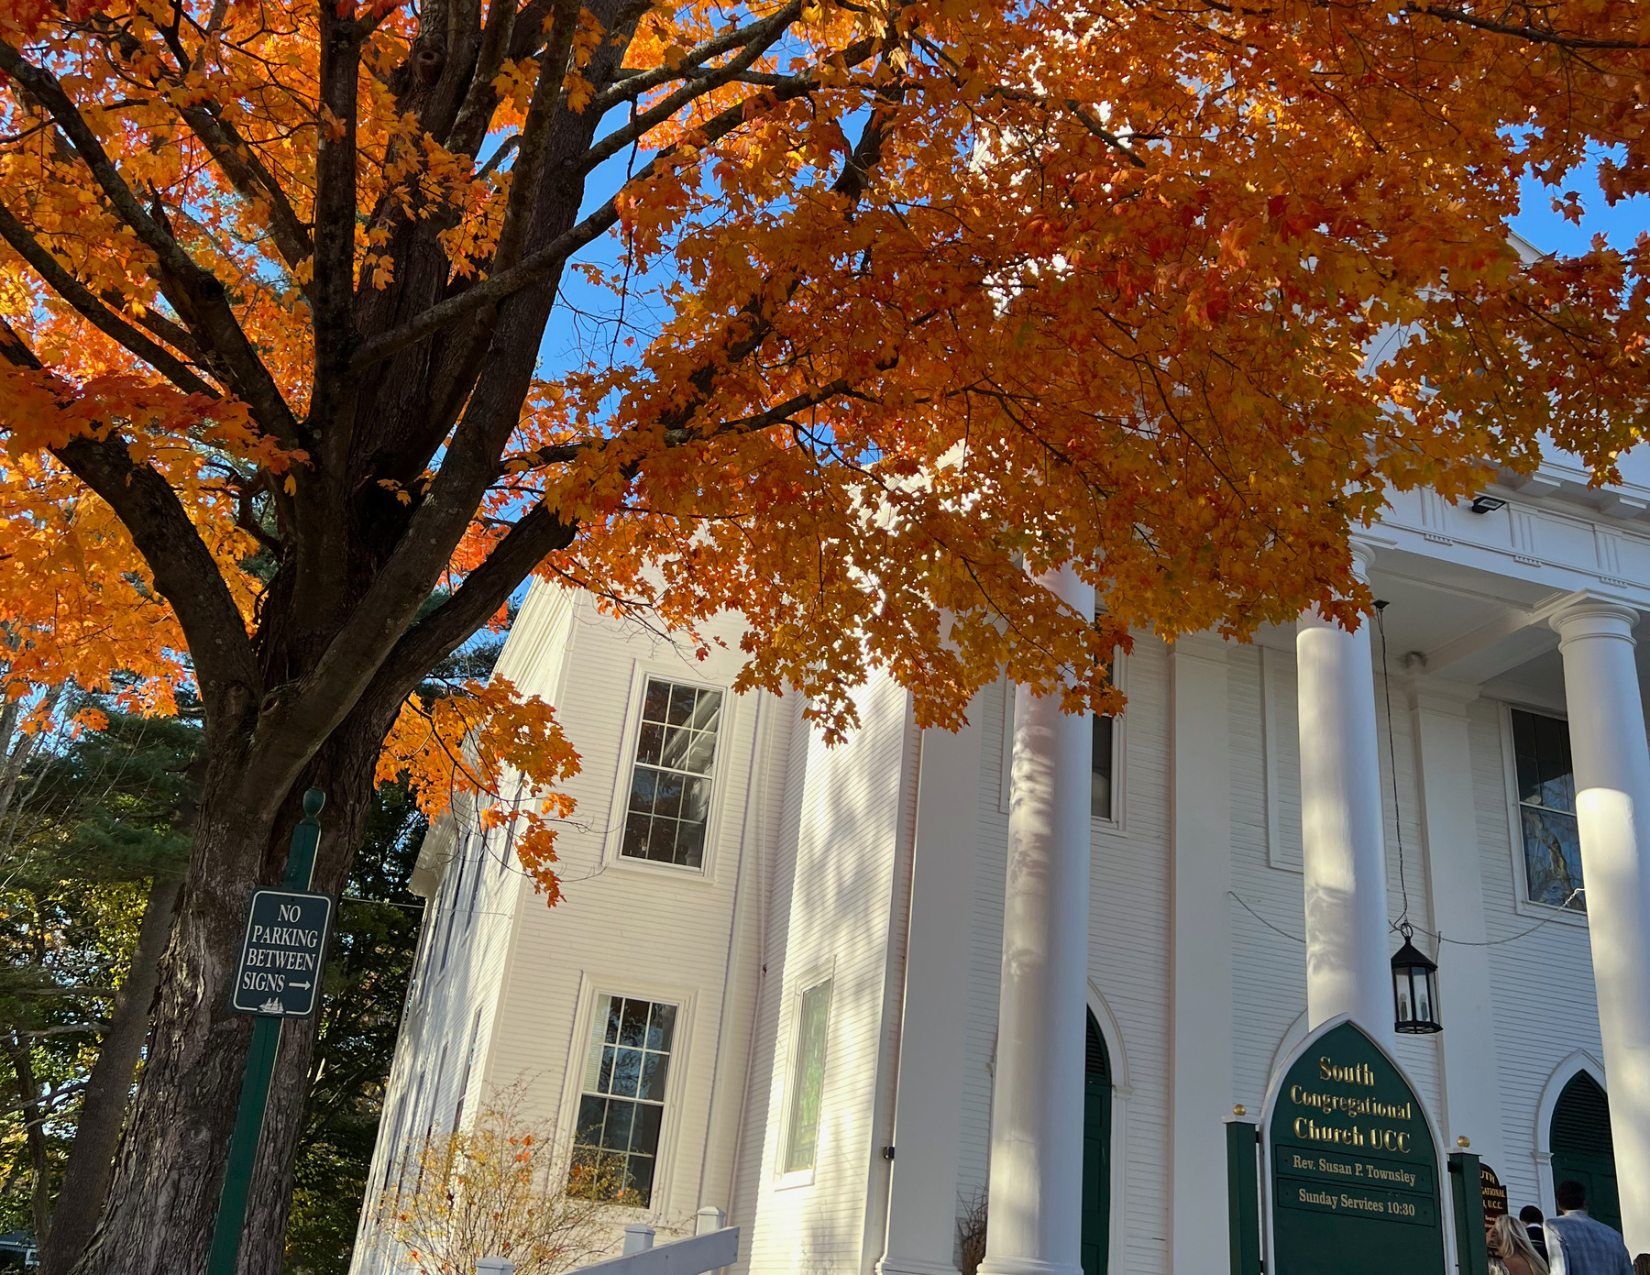 A large tree with vibrant orange leaves in front of a white church in Kennebunkport, Maine